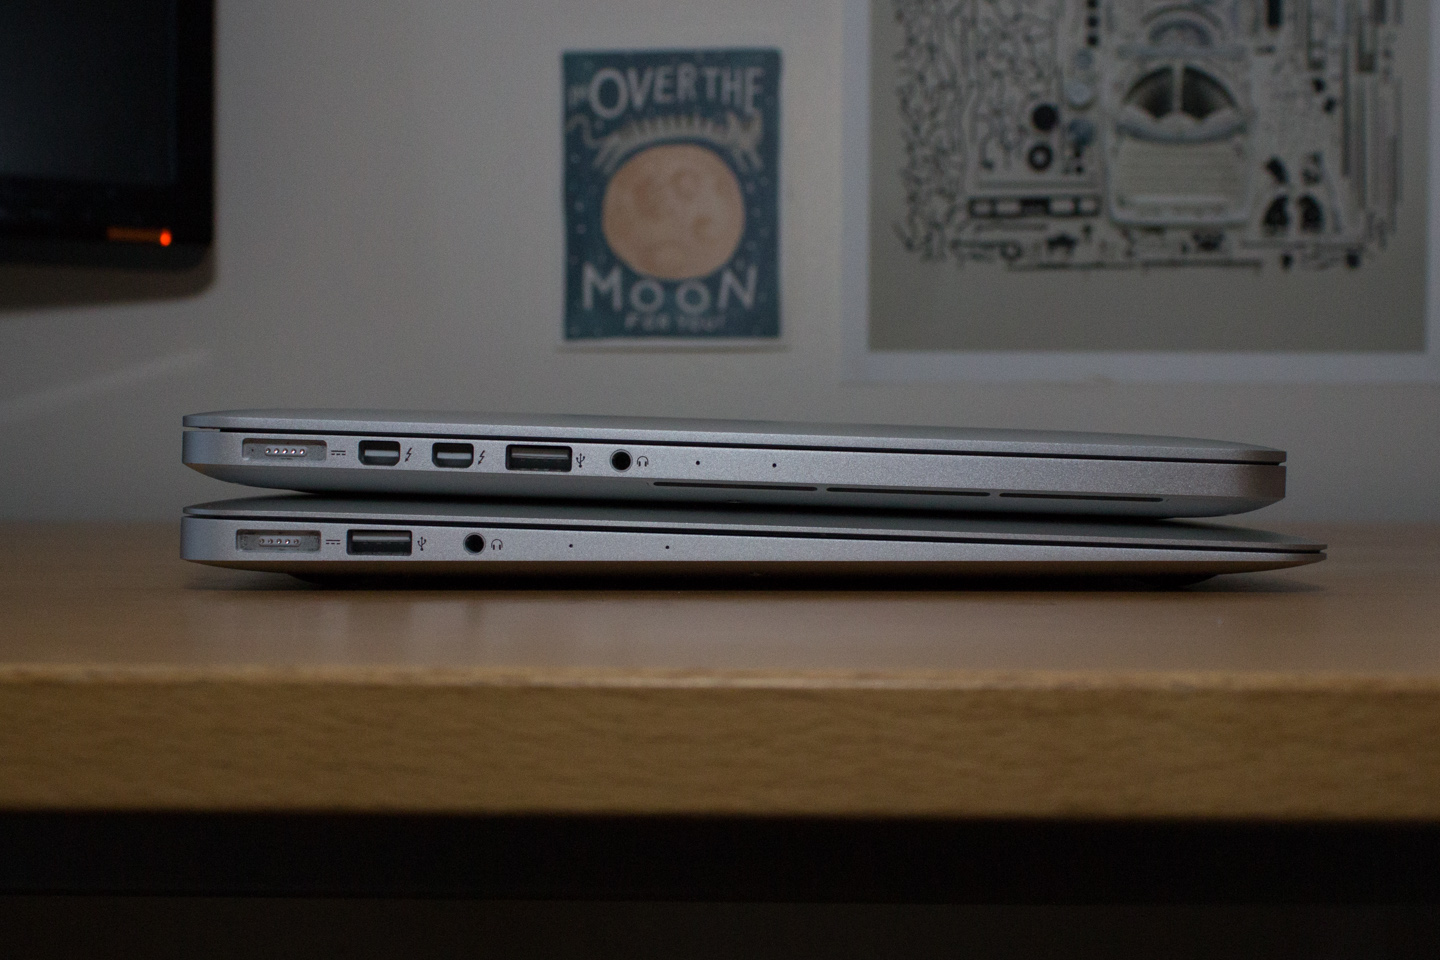 The 2013 MacBook Air Review (13-inch)